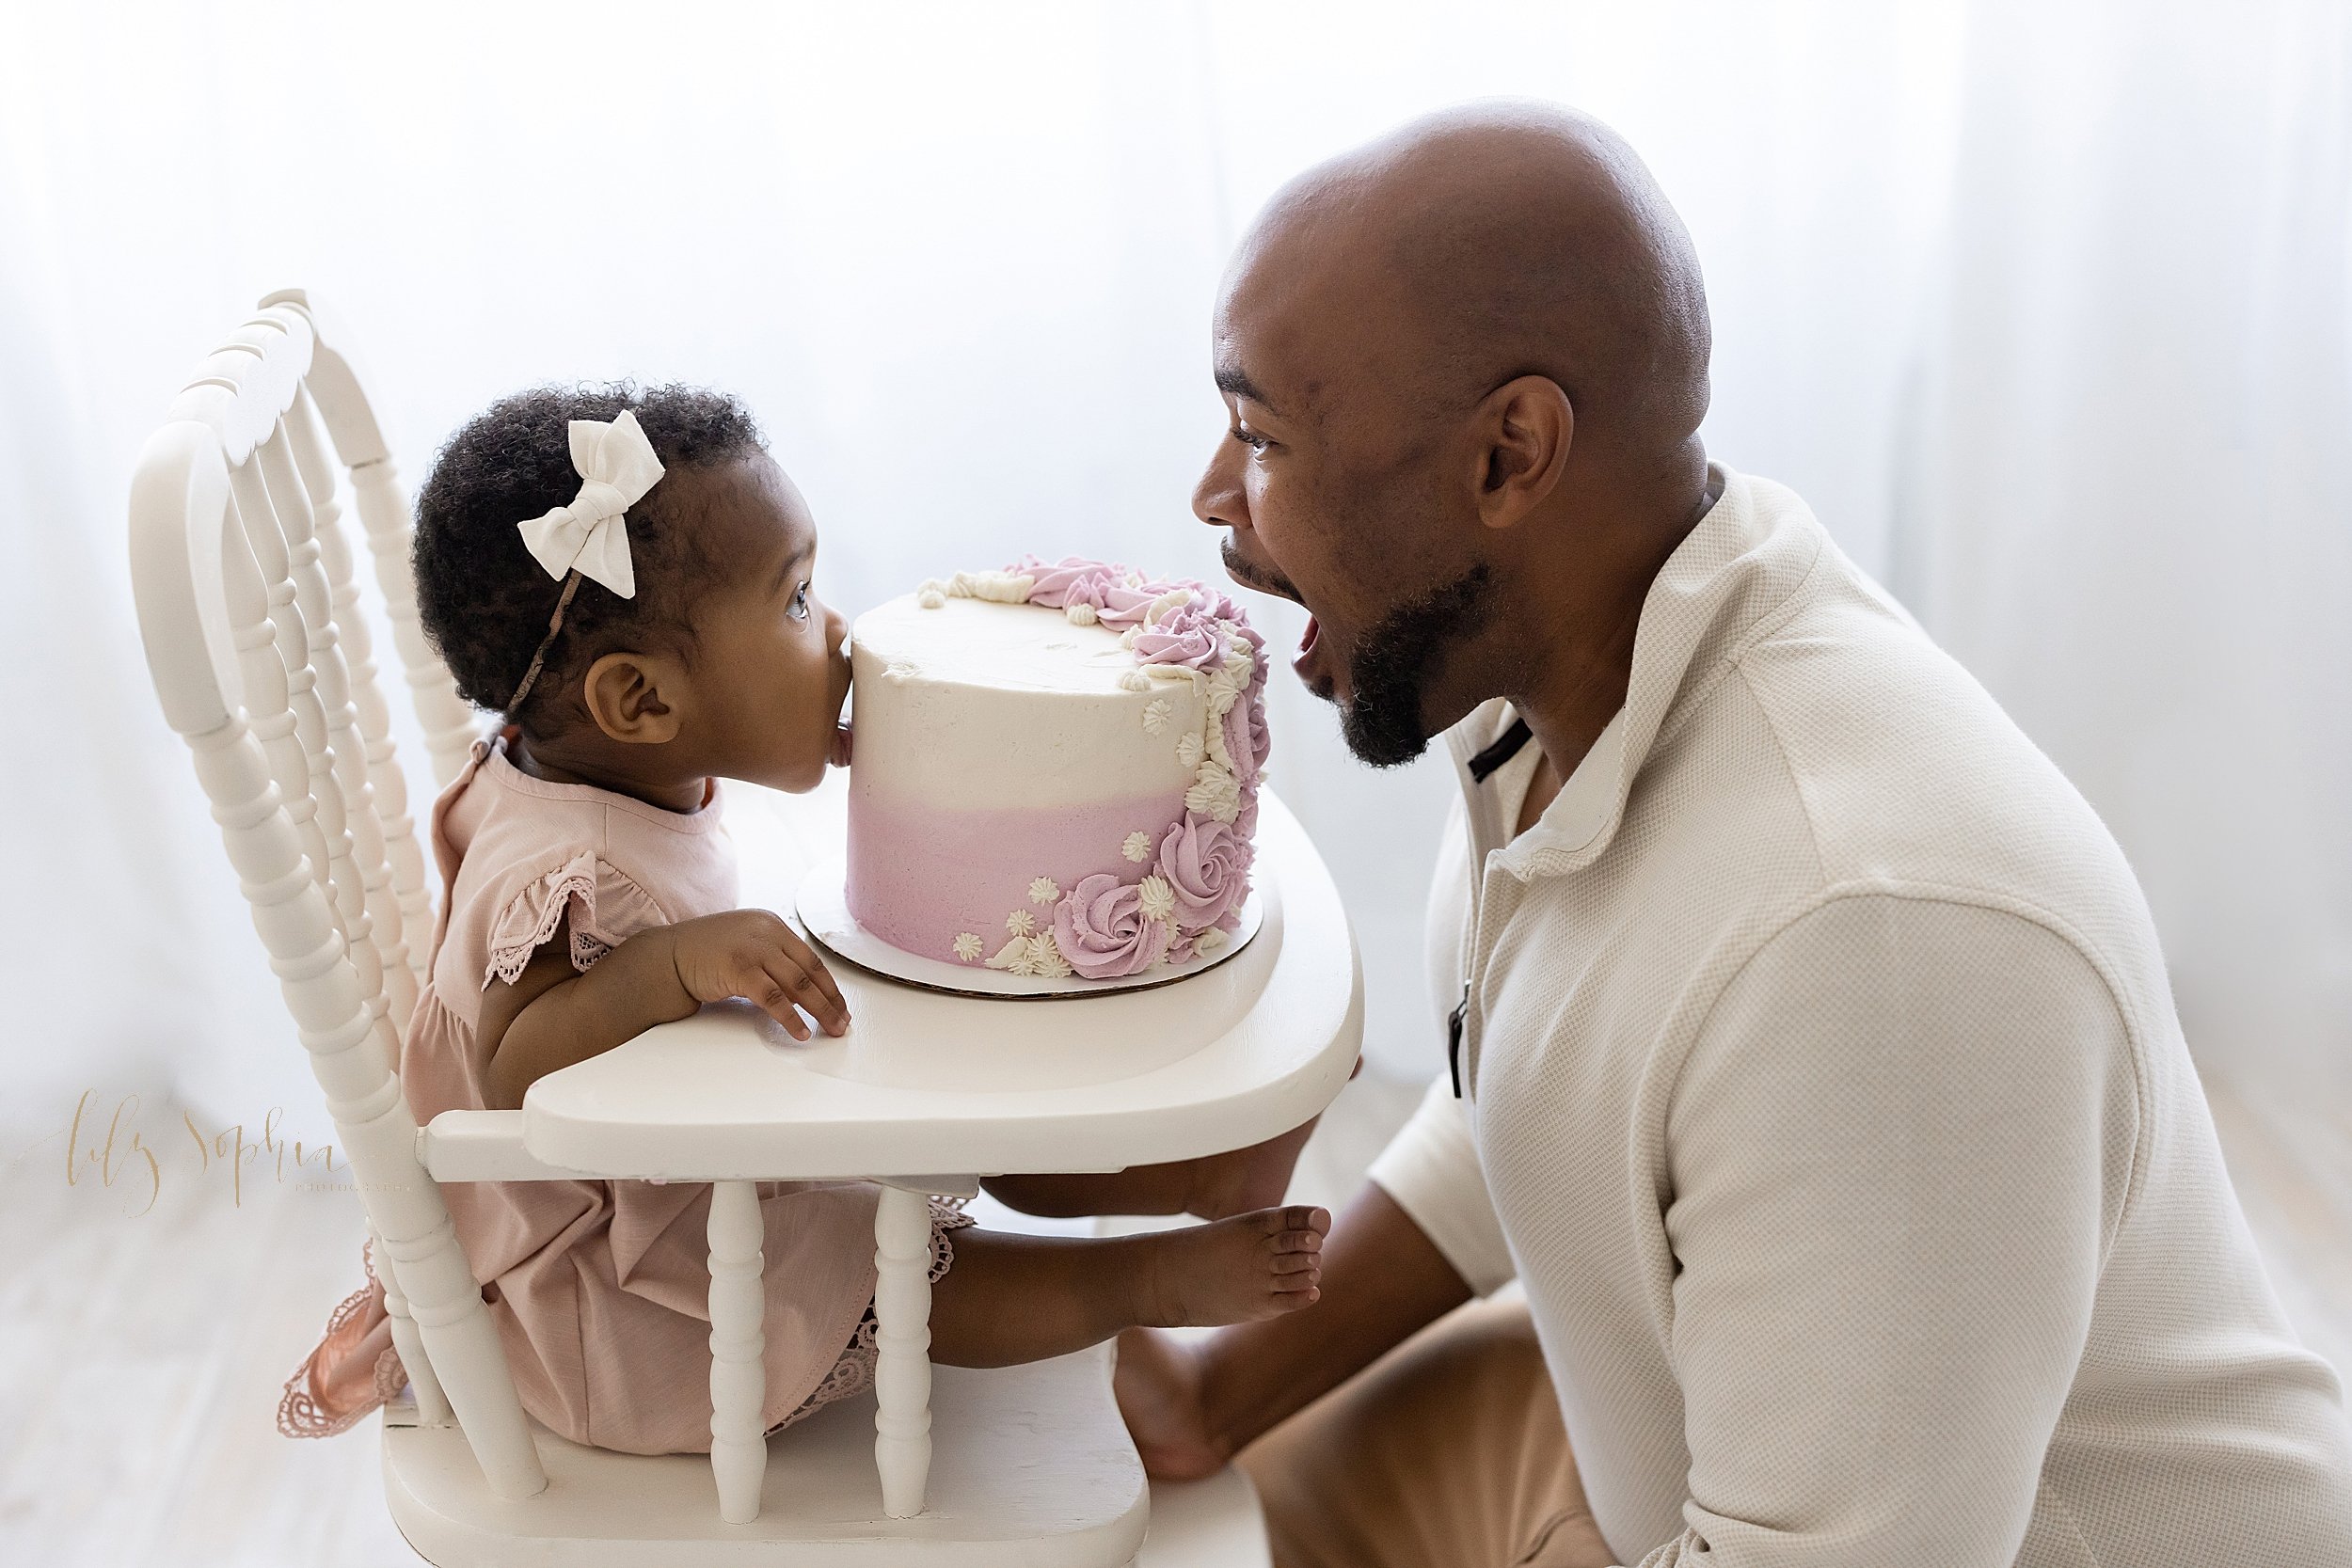  First birthday smash cake picture of a one year old African-American little girl sitting in an antique high chair with her smash cake on the tray and her father squatting in front of her as the two of them open their mouths to take a bite out of the